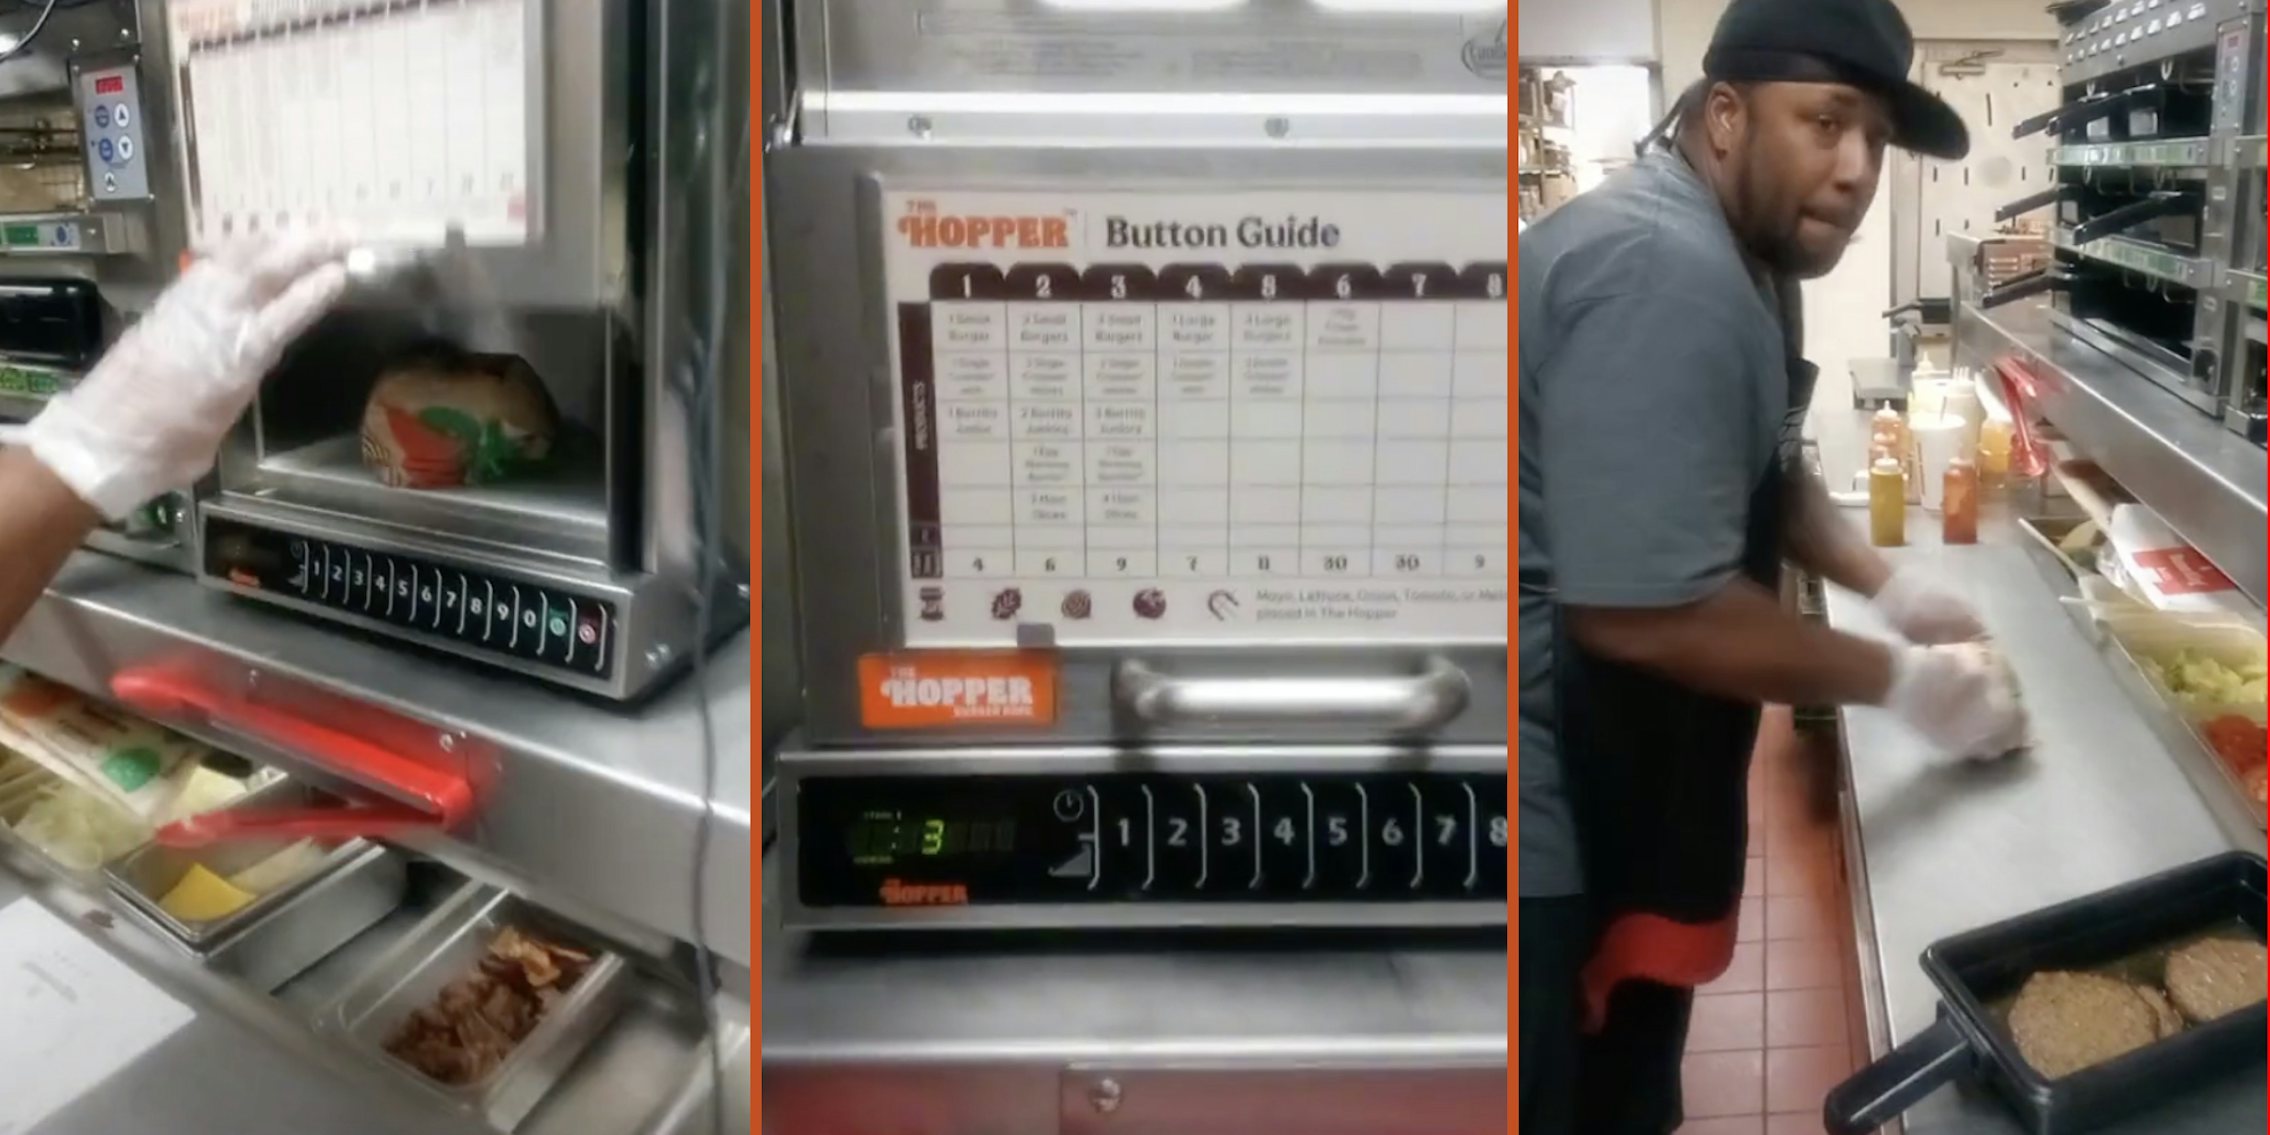 burger king worker places wrapped burger in hopper heater before serving it to customer